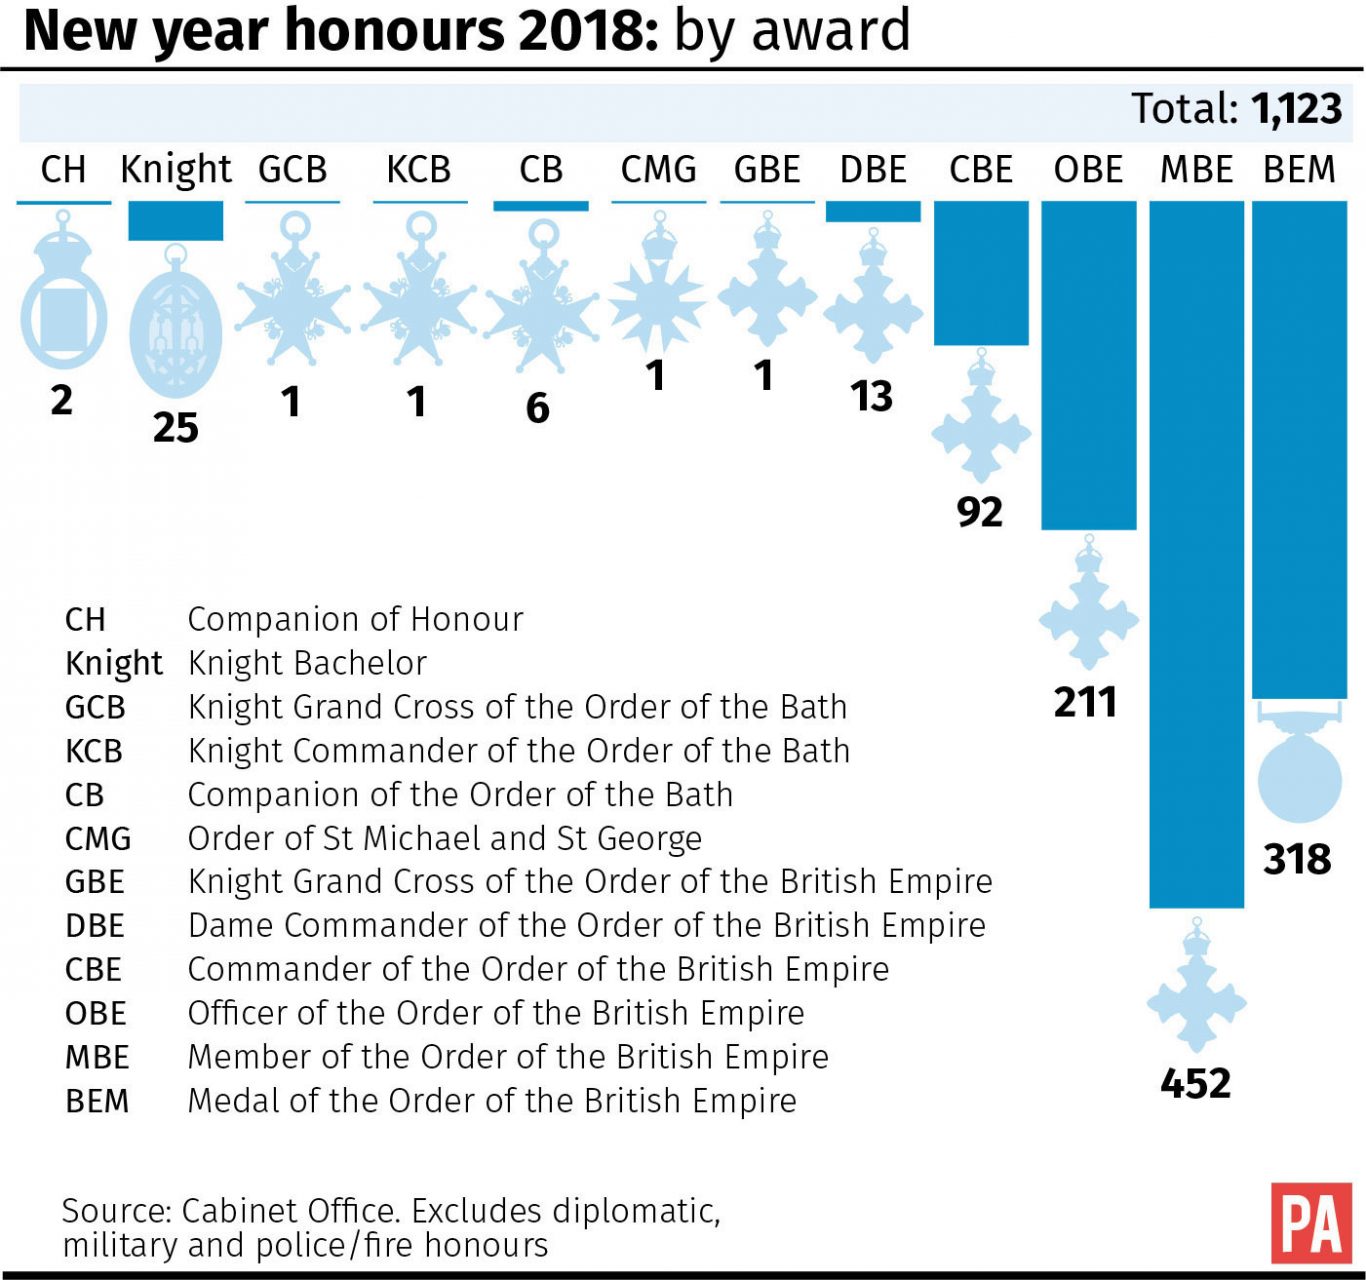 New year honours 2018: by award